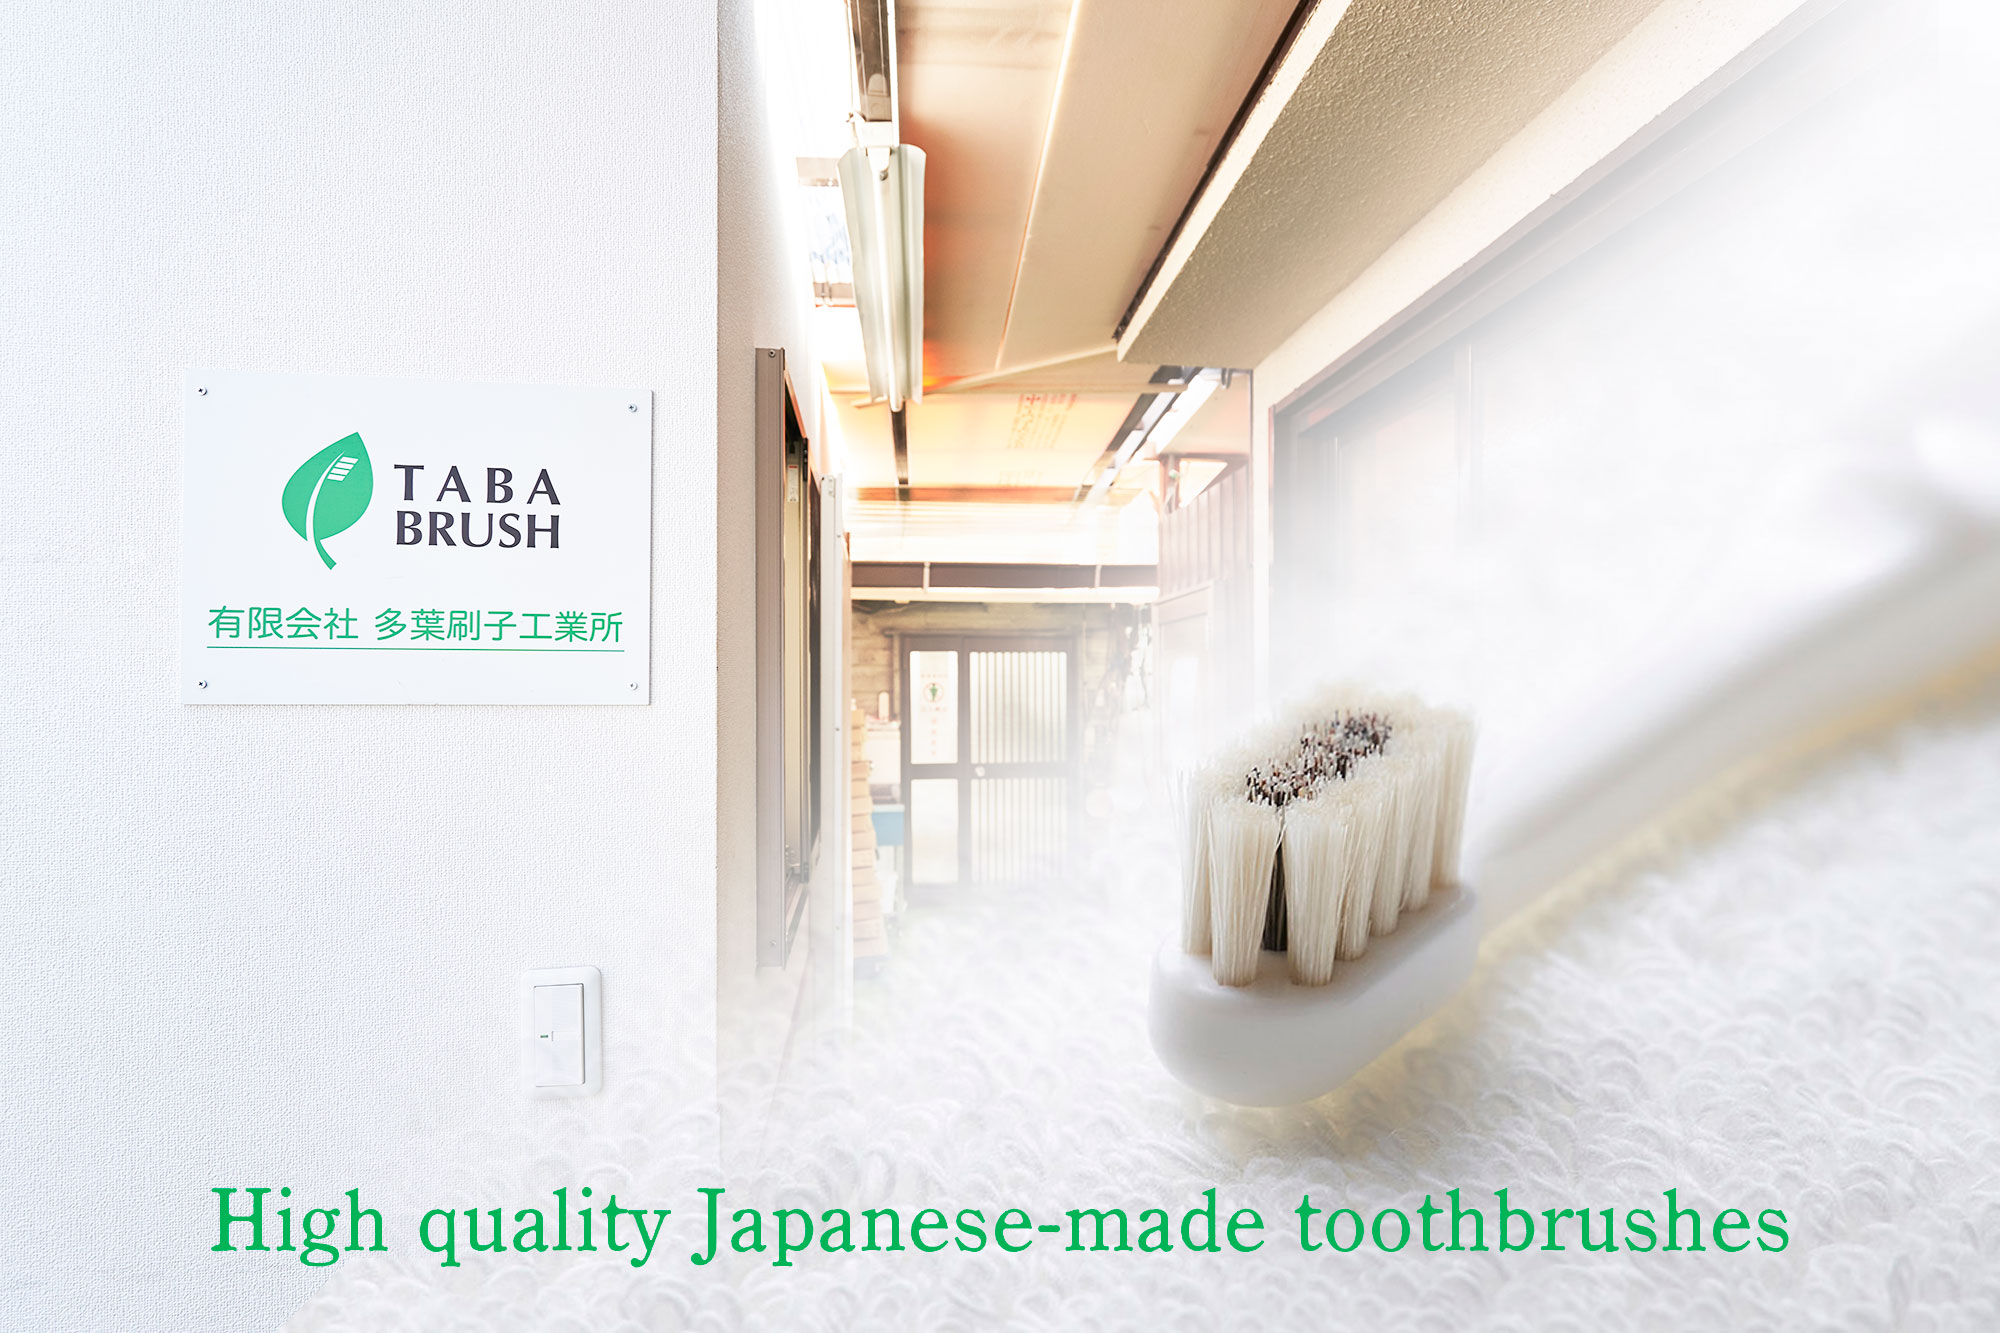 High quality Japanese-made toothbrushes